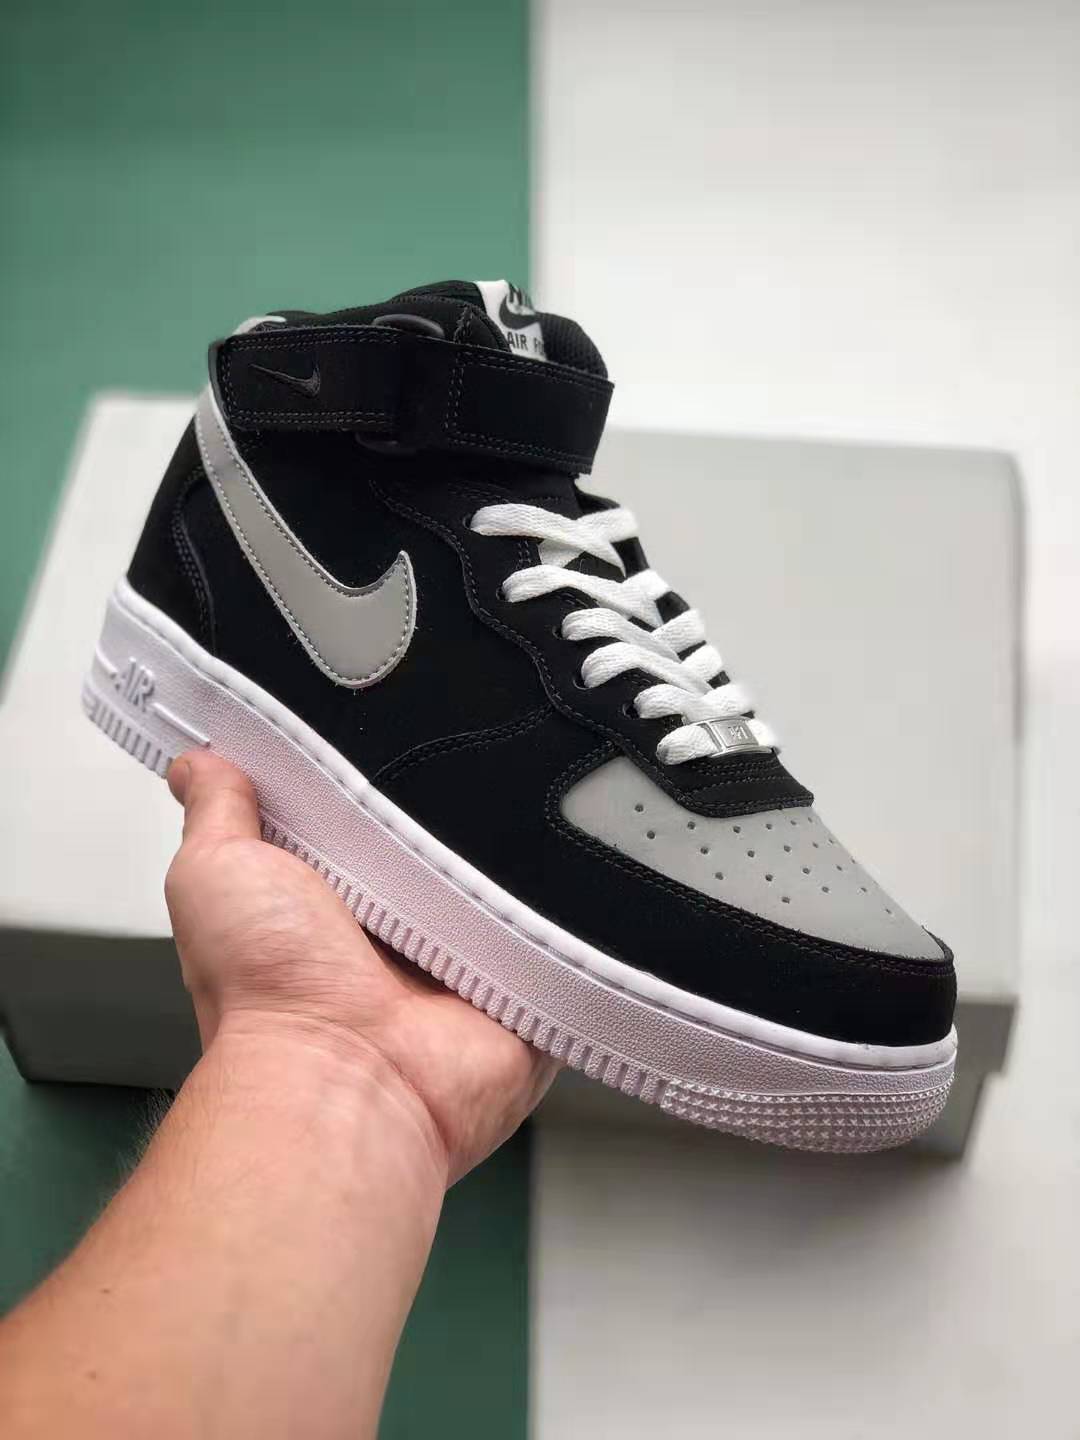 Nike Air Force 1 Mid 07 Black White 596728-305 - Stylish and Versatile Sneakers for Any Occasion